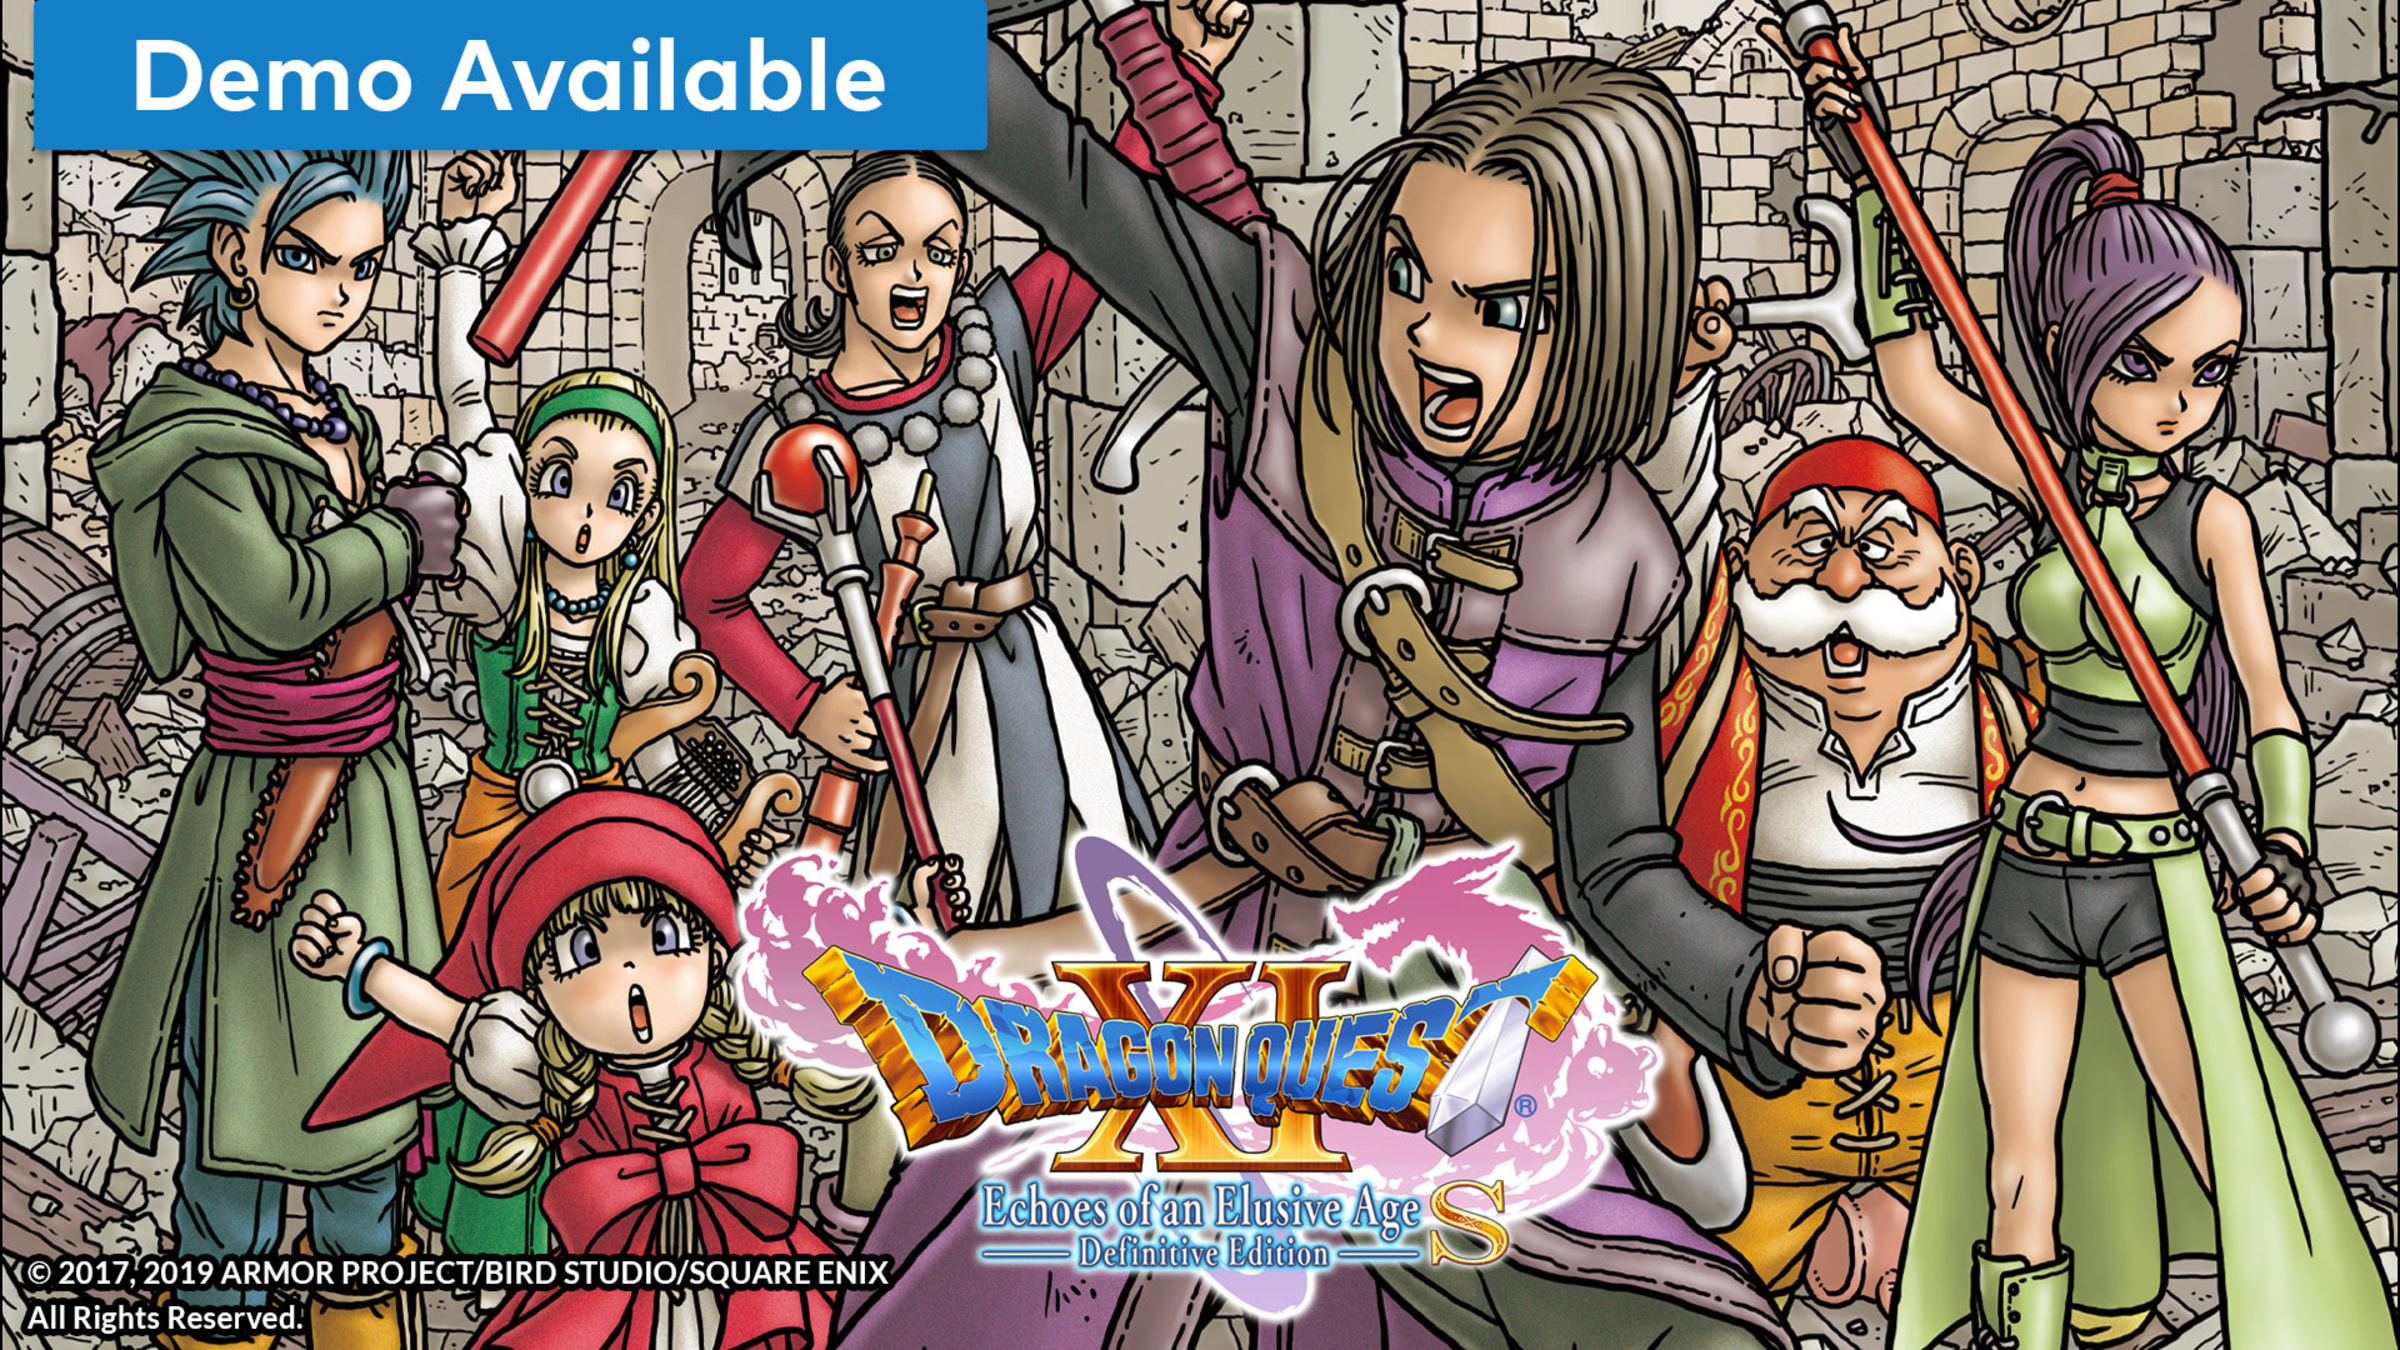 dragon-quest-xi-s-echoes-of-an-elusive-age-definitive-edition-for-nintendo-switch-nintendo